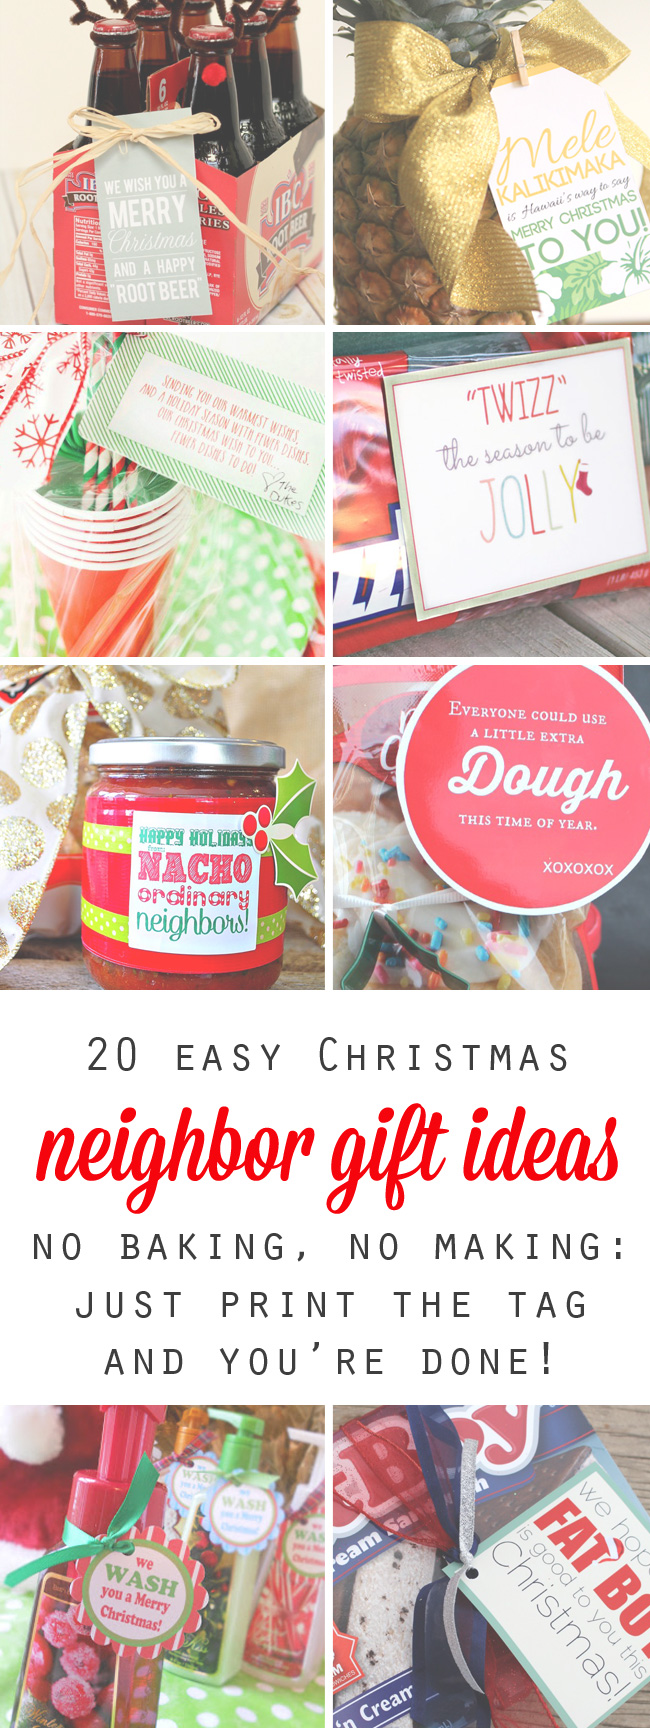 25 Inexpensive Christmas Gift Ideas That Mom Will Love: $0 to $50